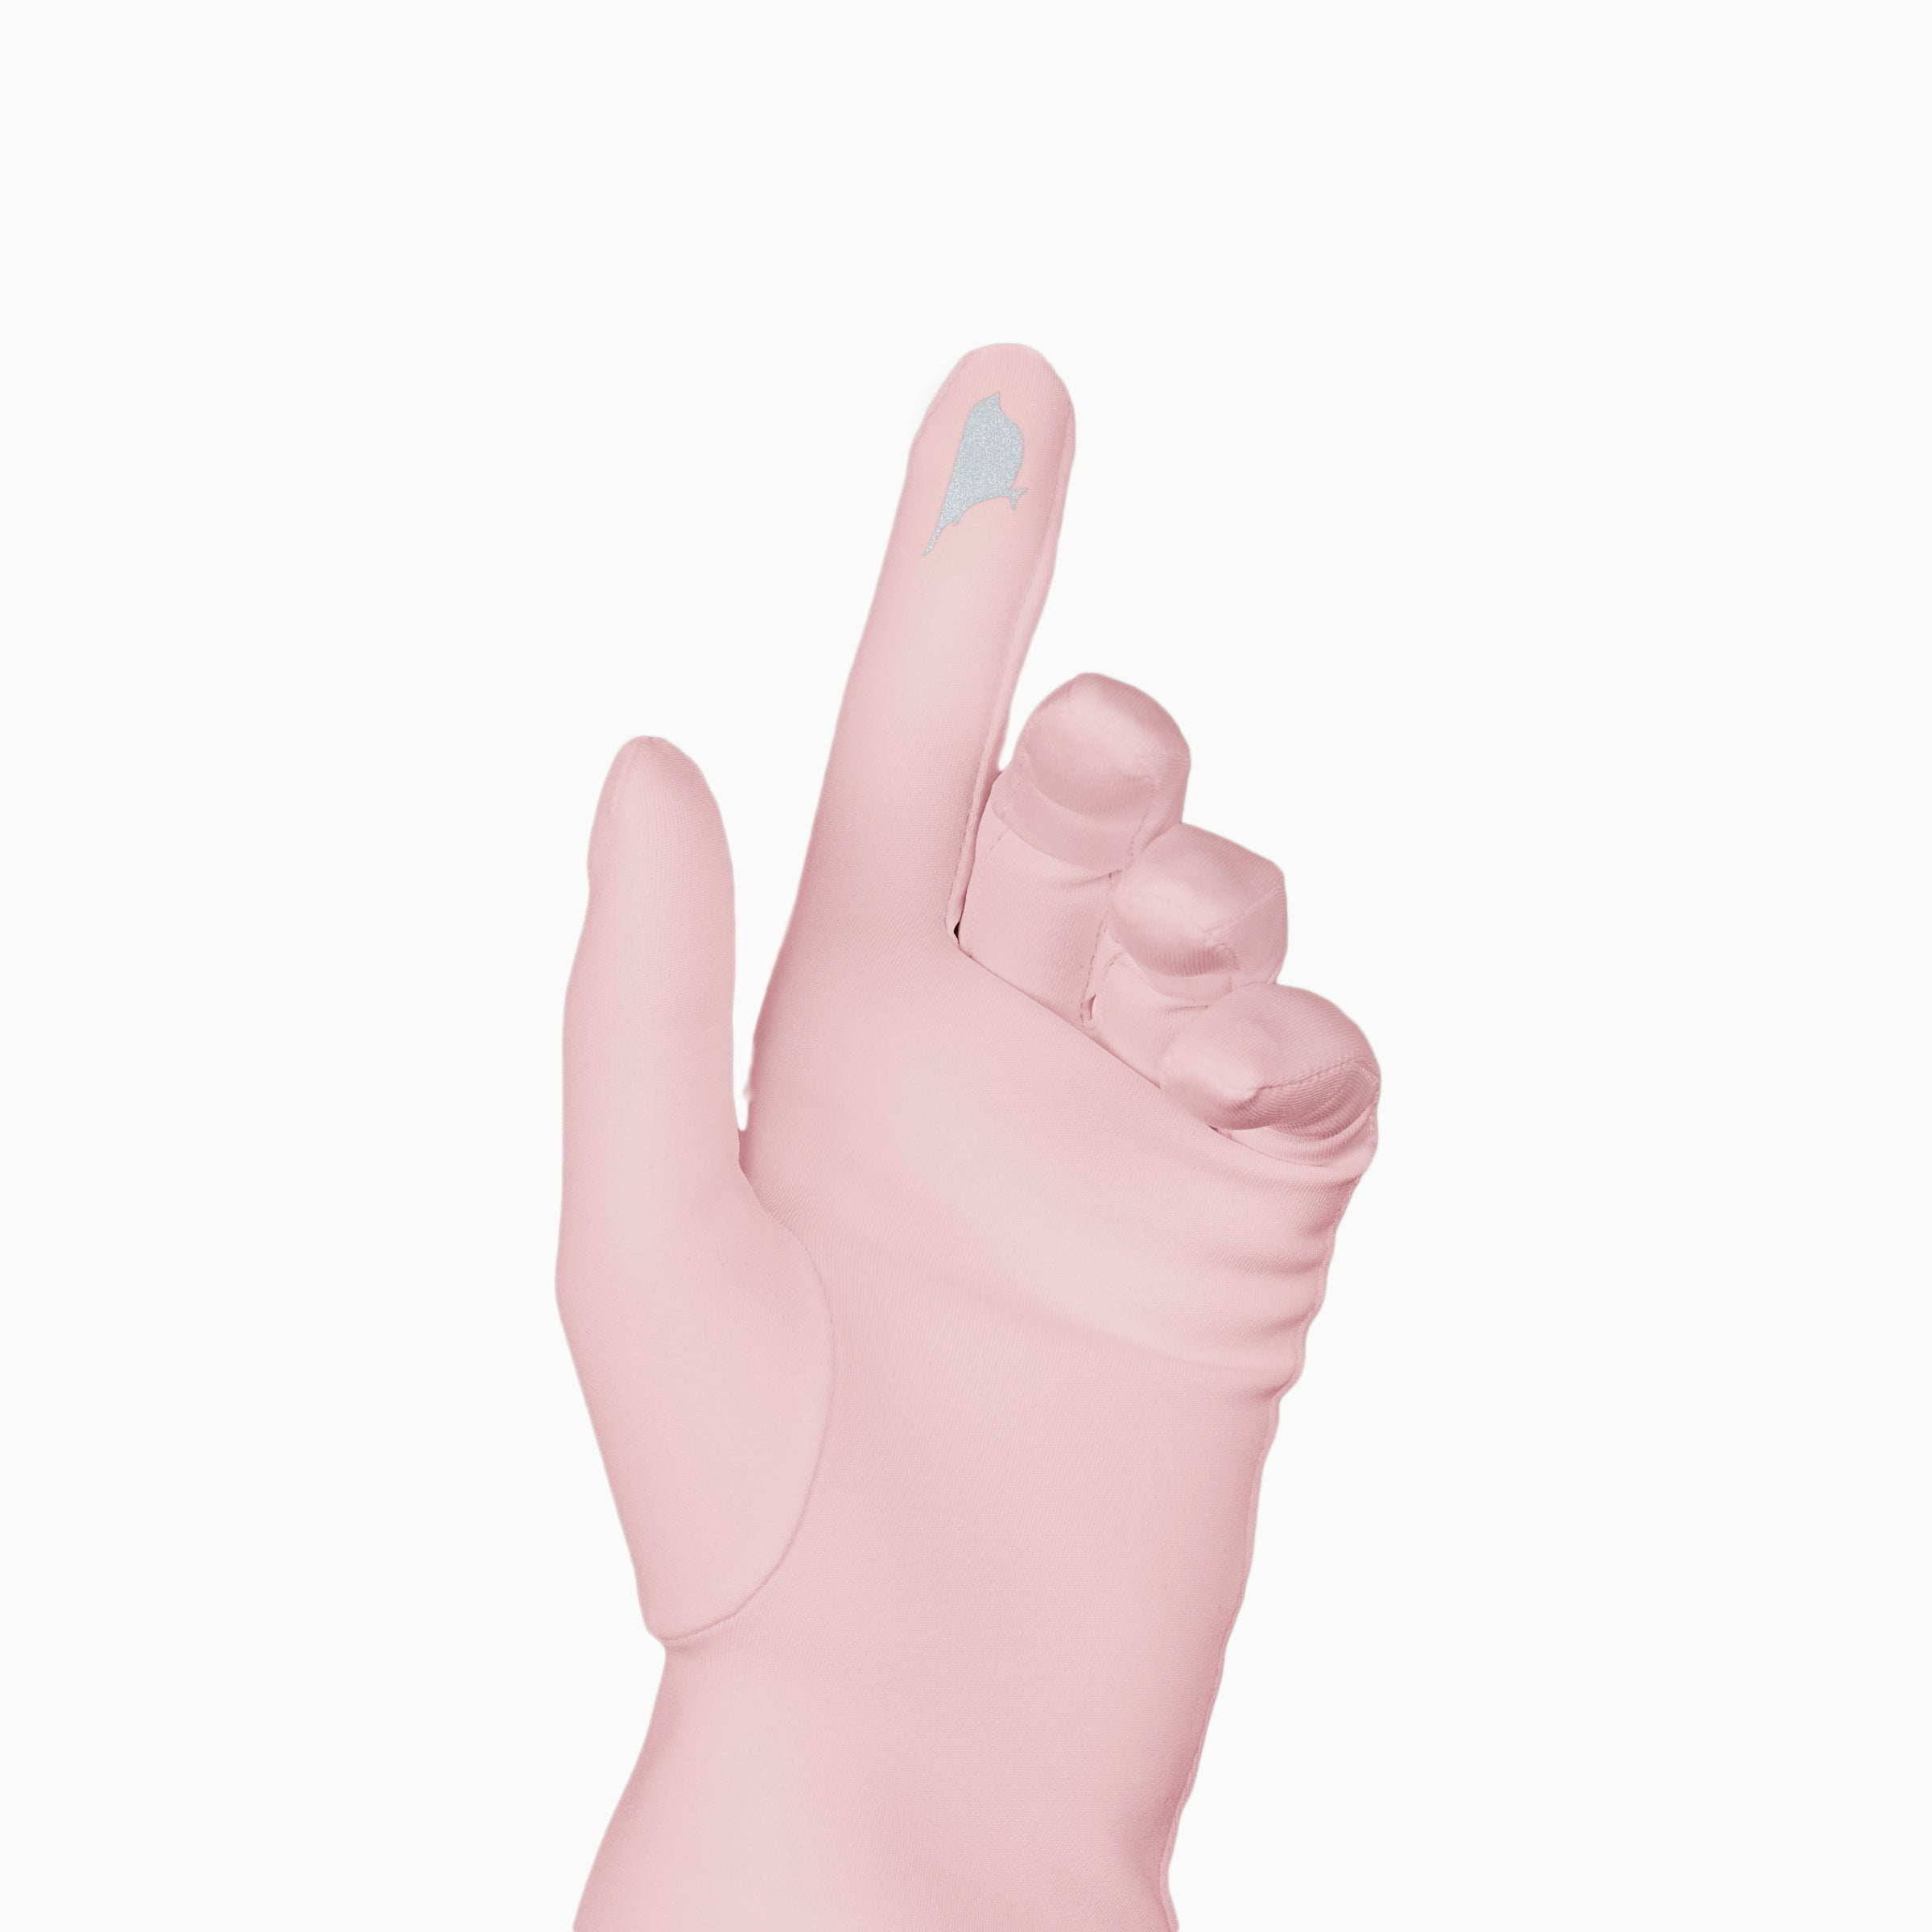 Pink women&#39;s glove against white background showing technology friendly index finger.